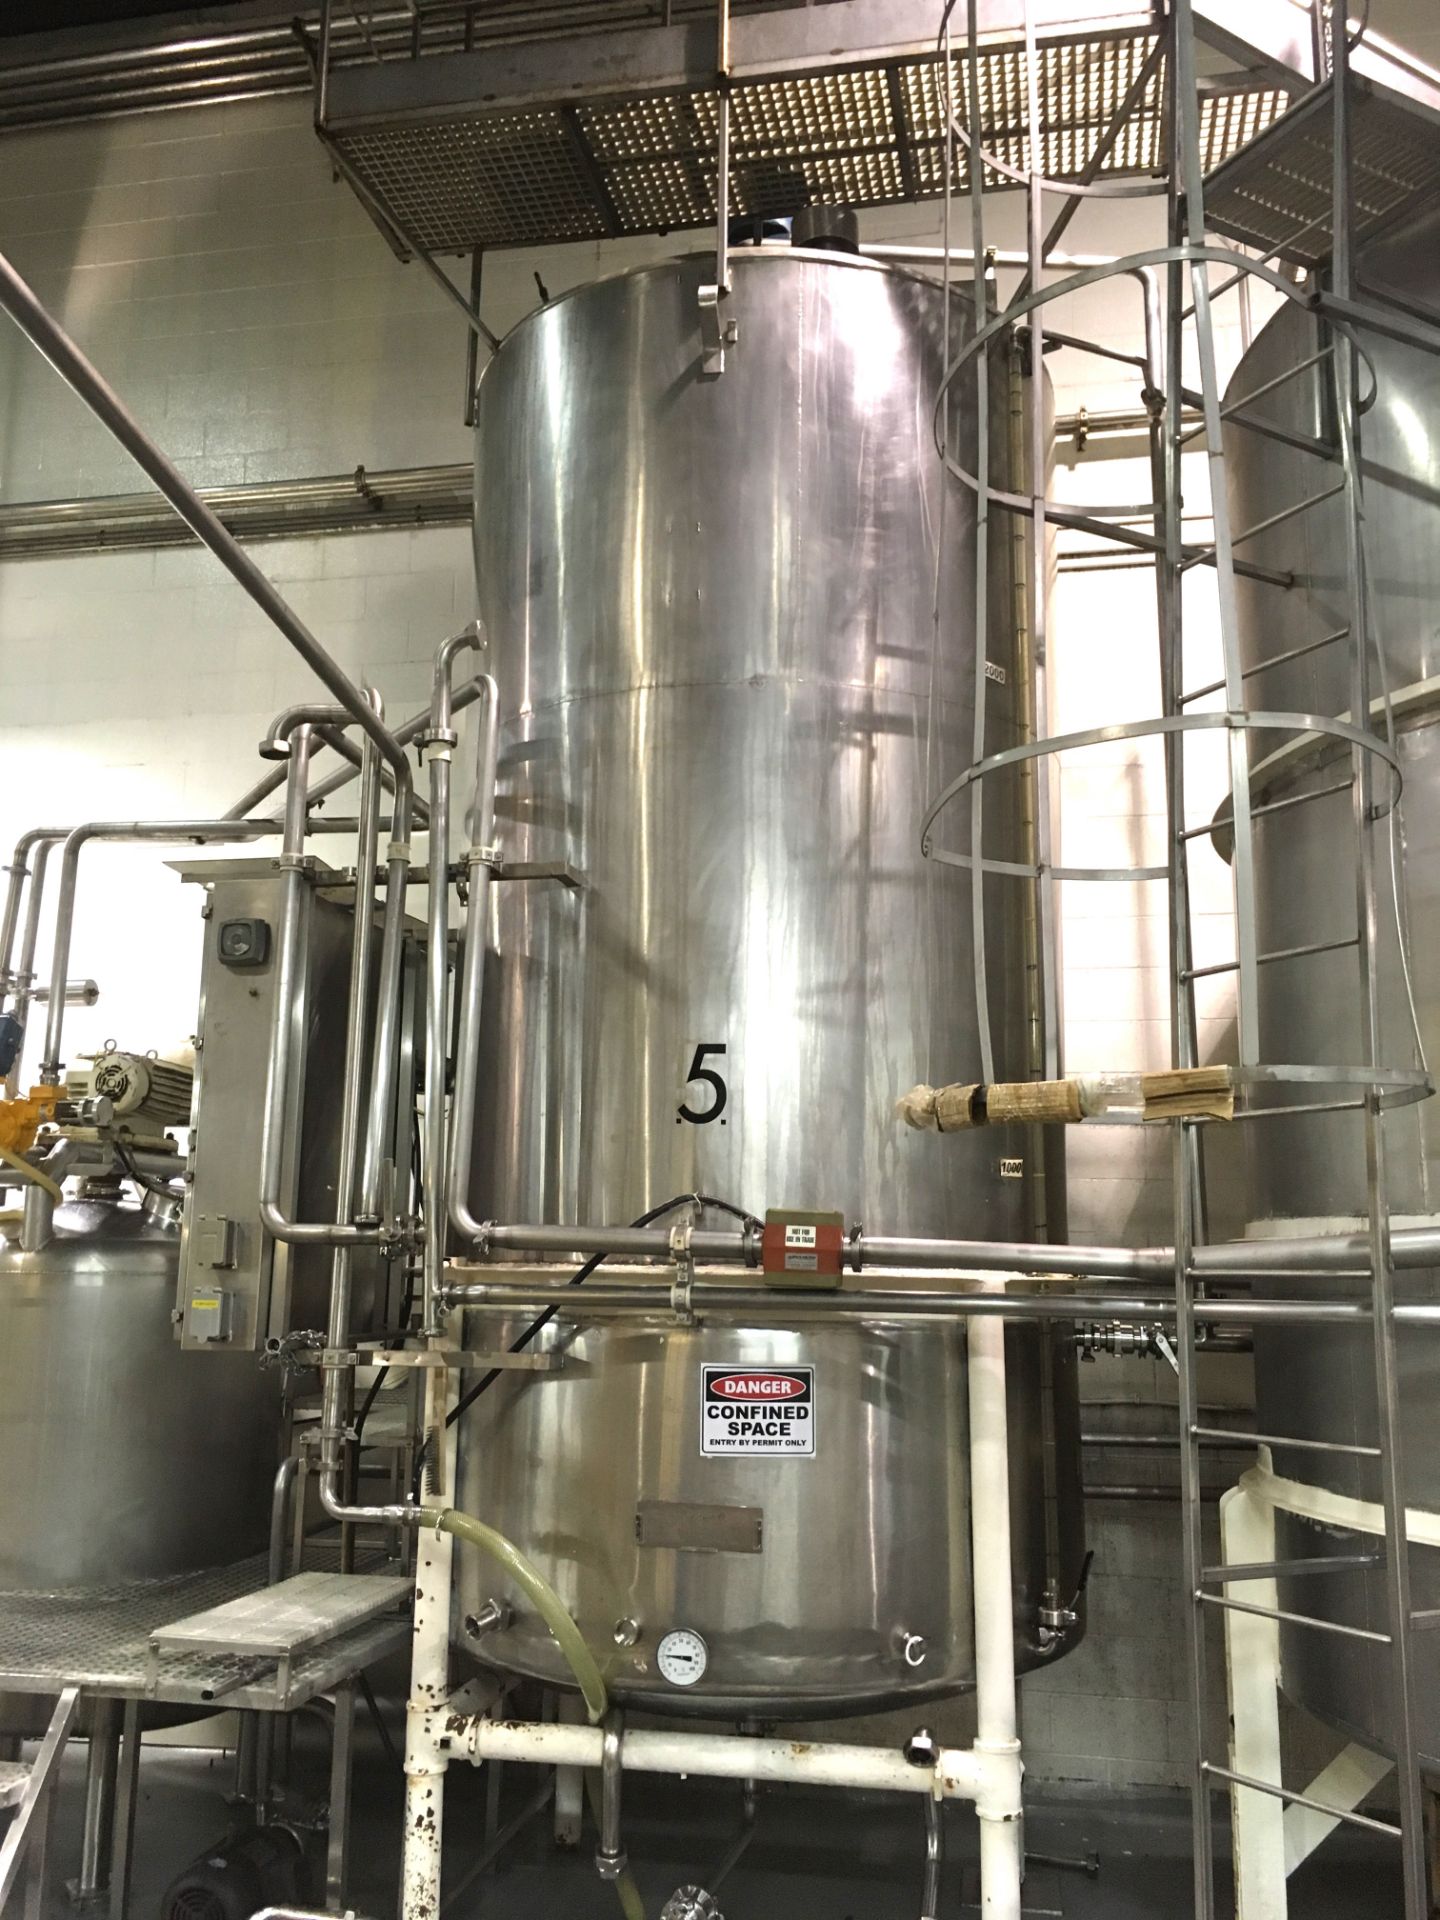 2,700 Gallon Vertical Stainless Steel Mixing TankStainless Steel Construction, Last used December